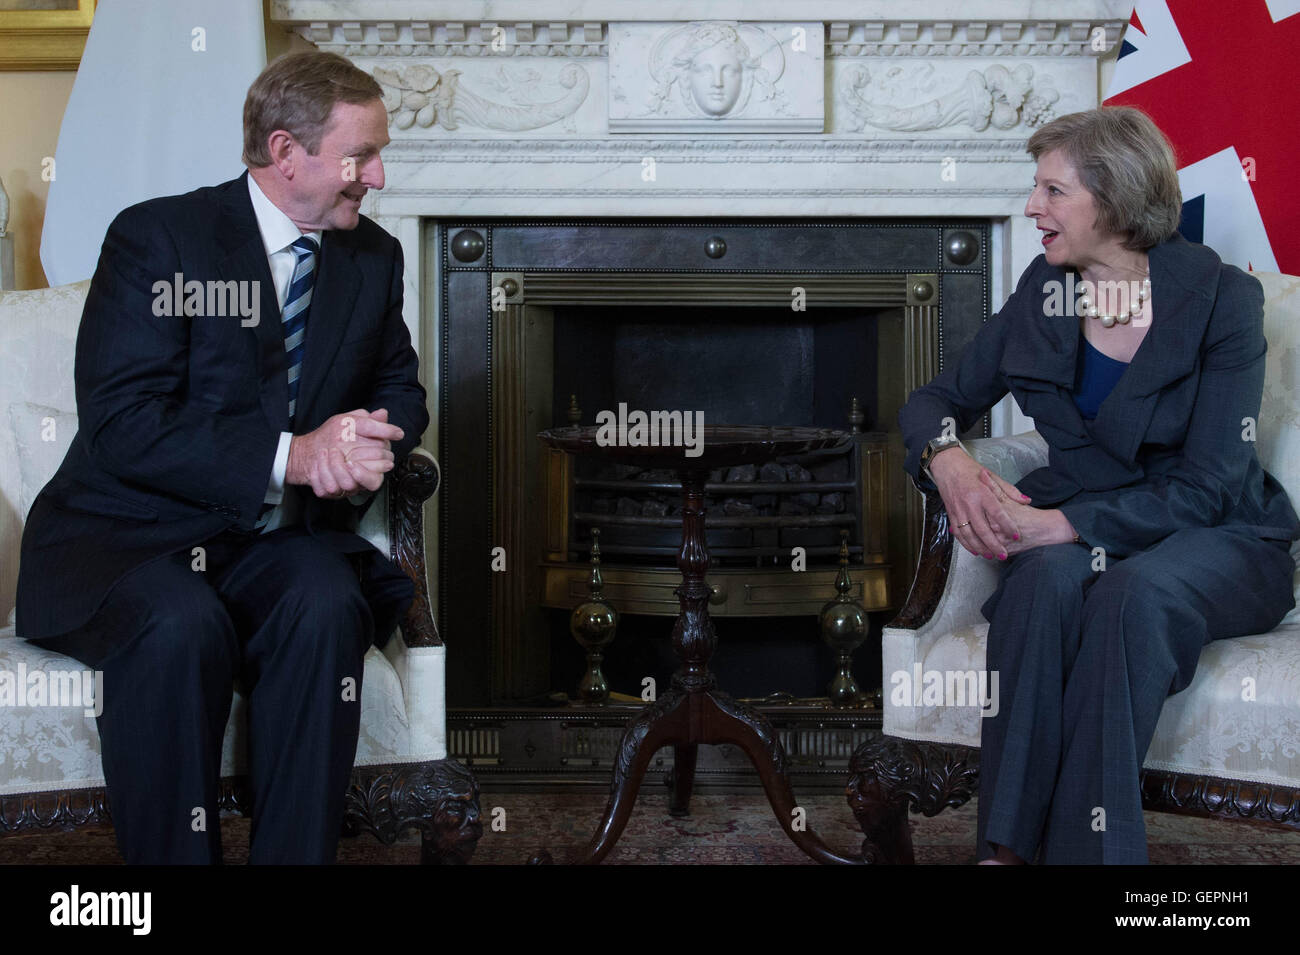 Prime Minister Theresa May with Irish Taoiseach Enda Kenny inside 10 Downing Street, London, ahead of the latest meetings on how Brexit will unfold. Stock Photo